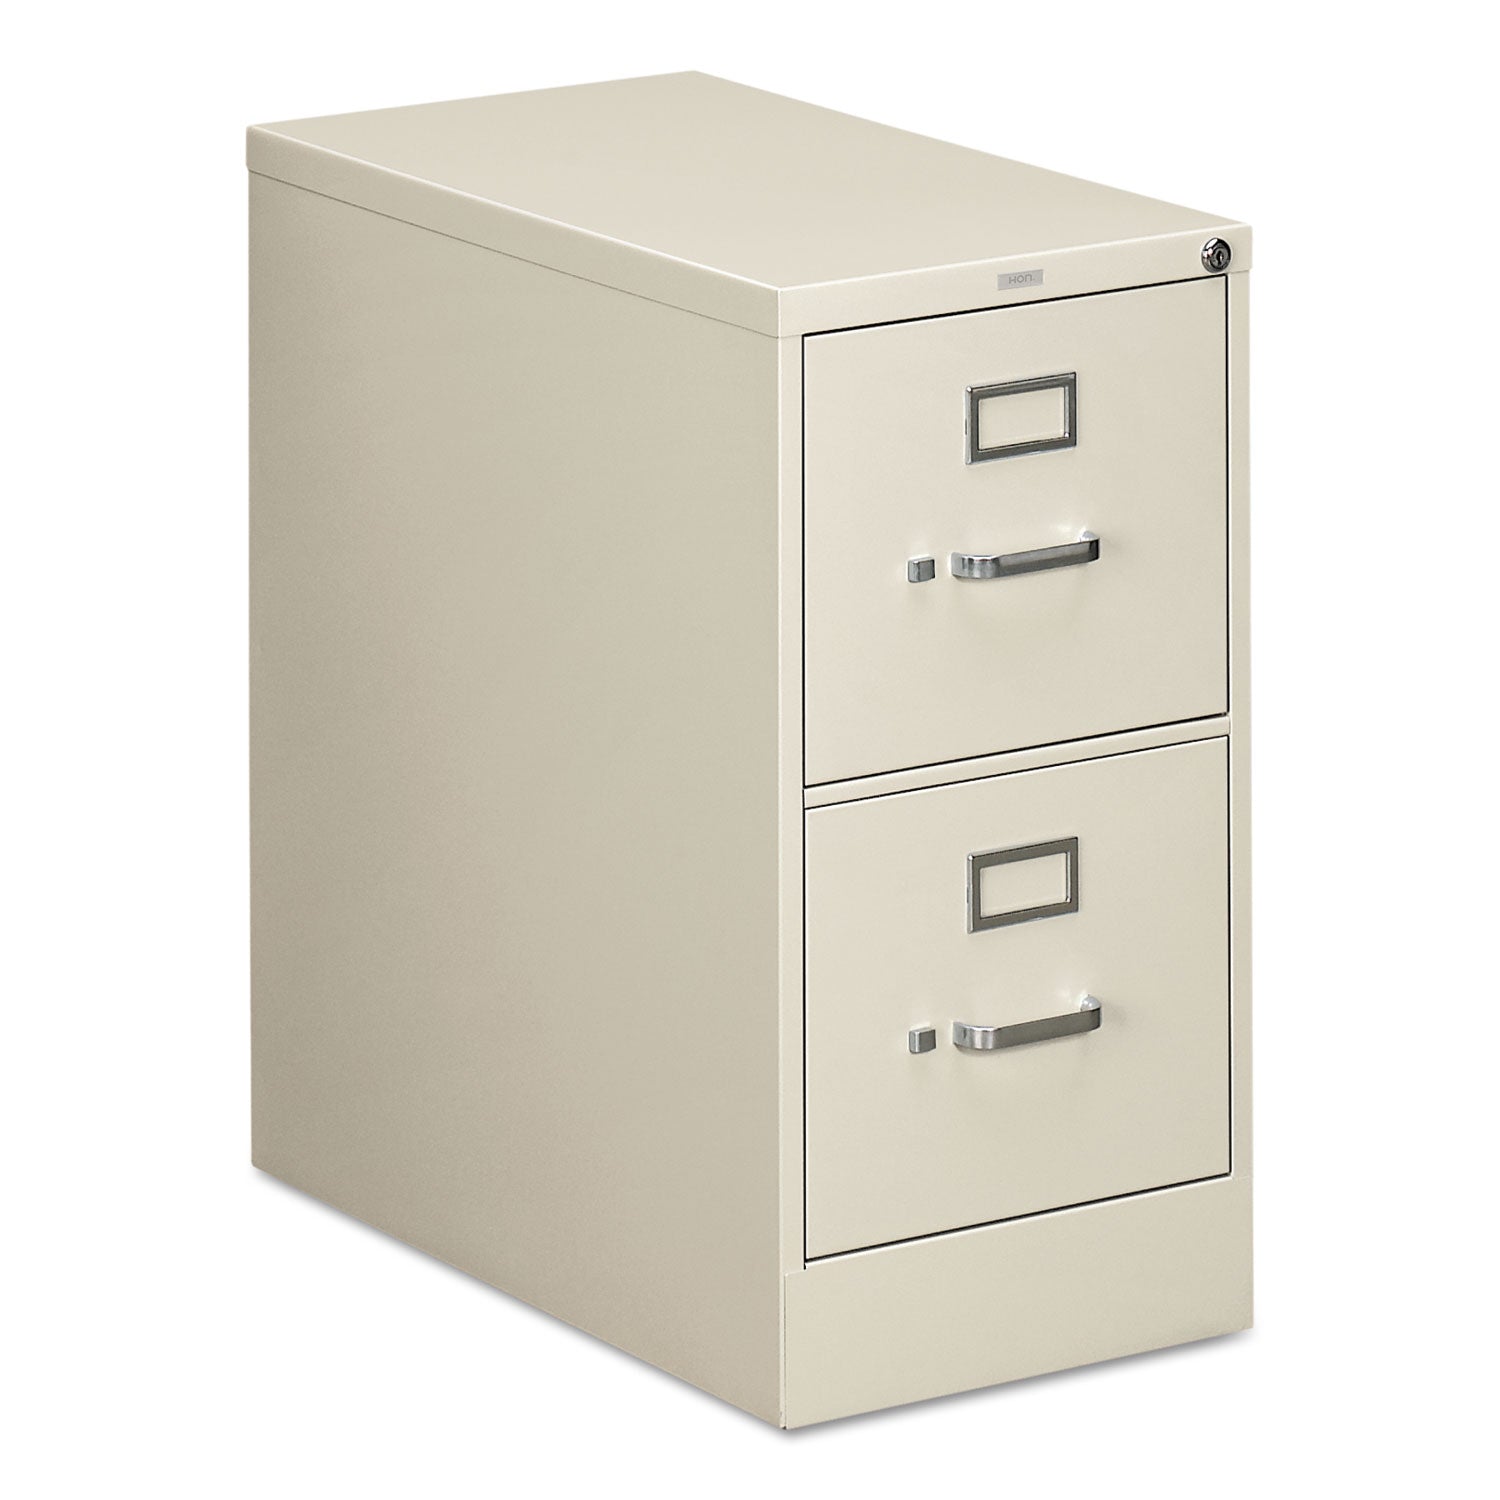 310 Series Vertical File, 2 Letter-Size File Drawers, Light Gray, 15" x 26.5" x 29 - 